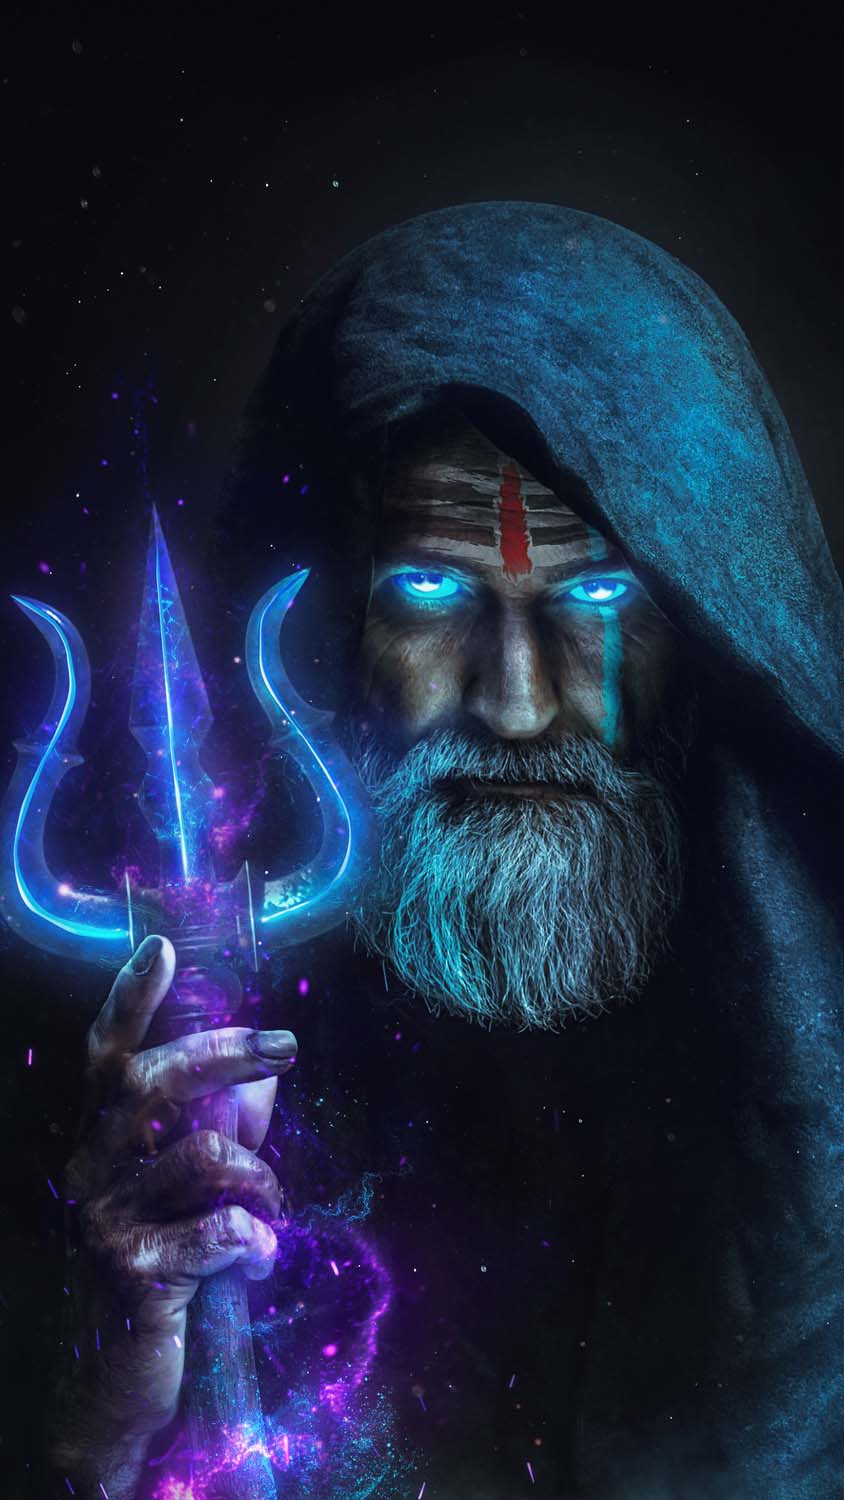 Shiva IPhone Wallpaper HD - IPhone Wallpapers : iPhone Wallpapers